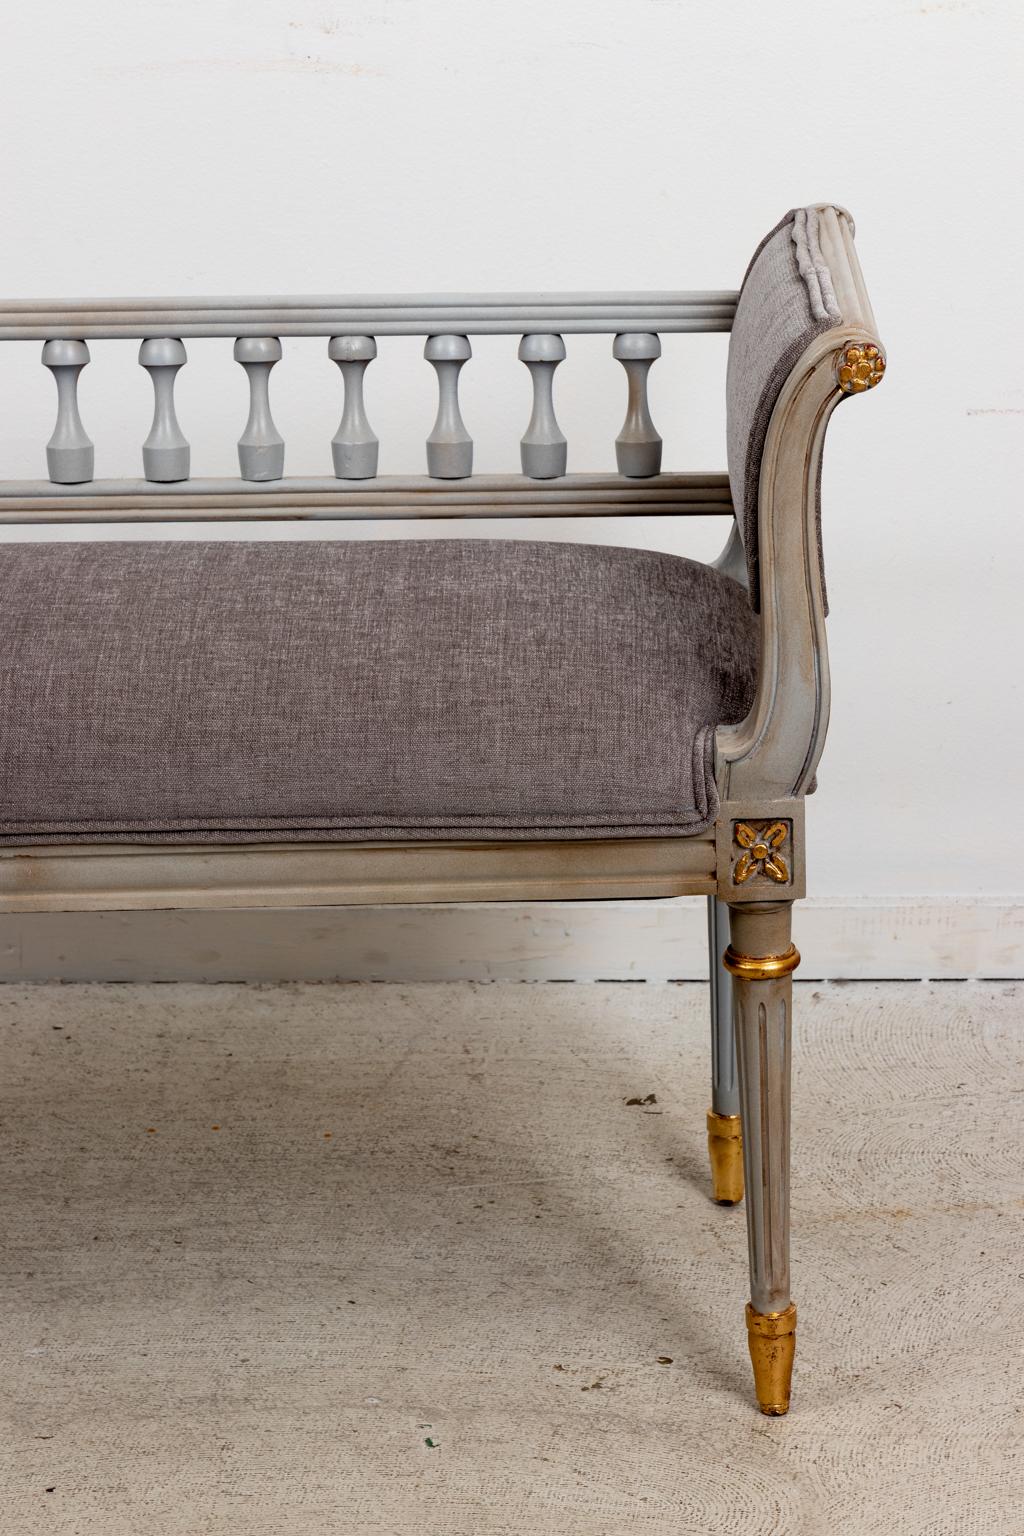 Circa 1960s Louis XVI style painted gilded bench with turned spindles and scrolled arms, newly upholstered with some wear to finish. Made in the United States. Please note of wear consistent with age.